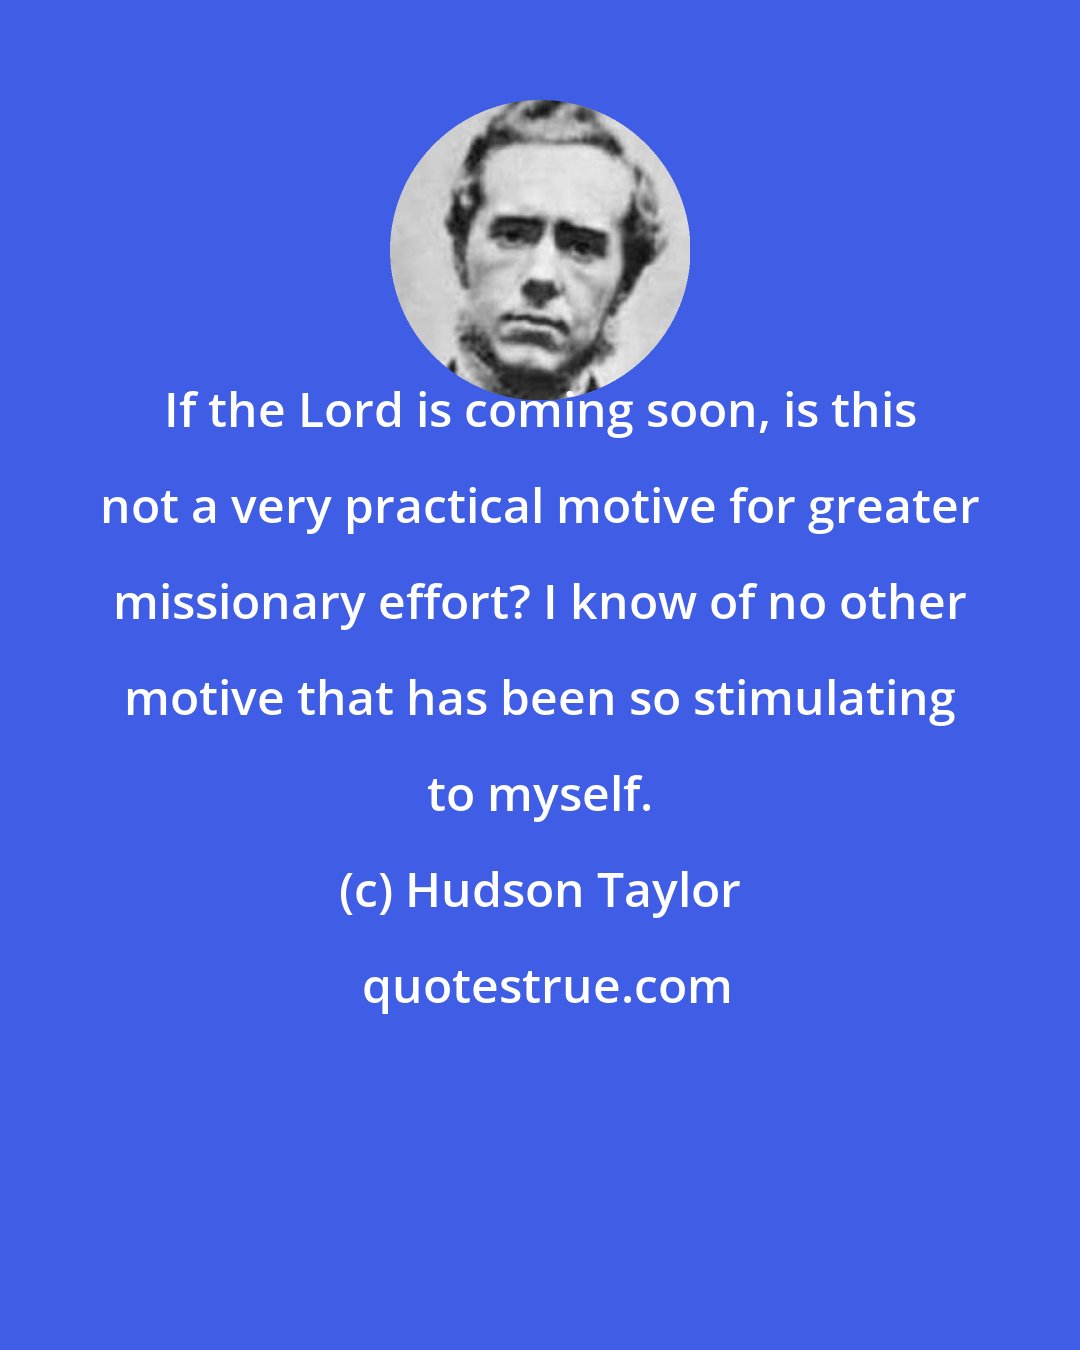 Hudson Taylor: If the Lord is coming soon, is this not a very practical motive for greater missionary effort? I know of no other motive that has been so stimulating to myself.